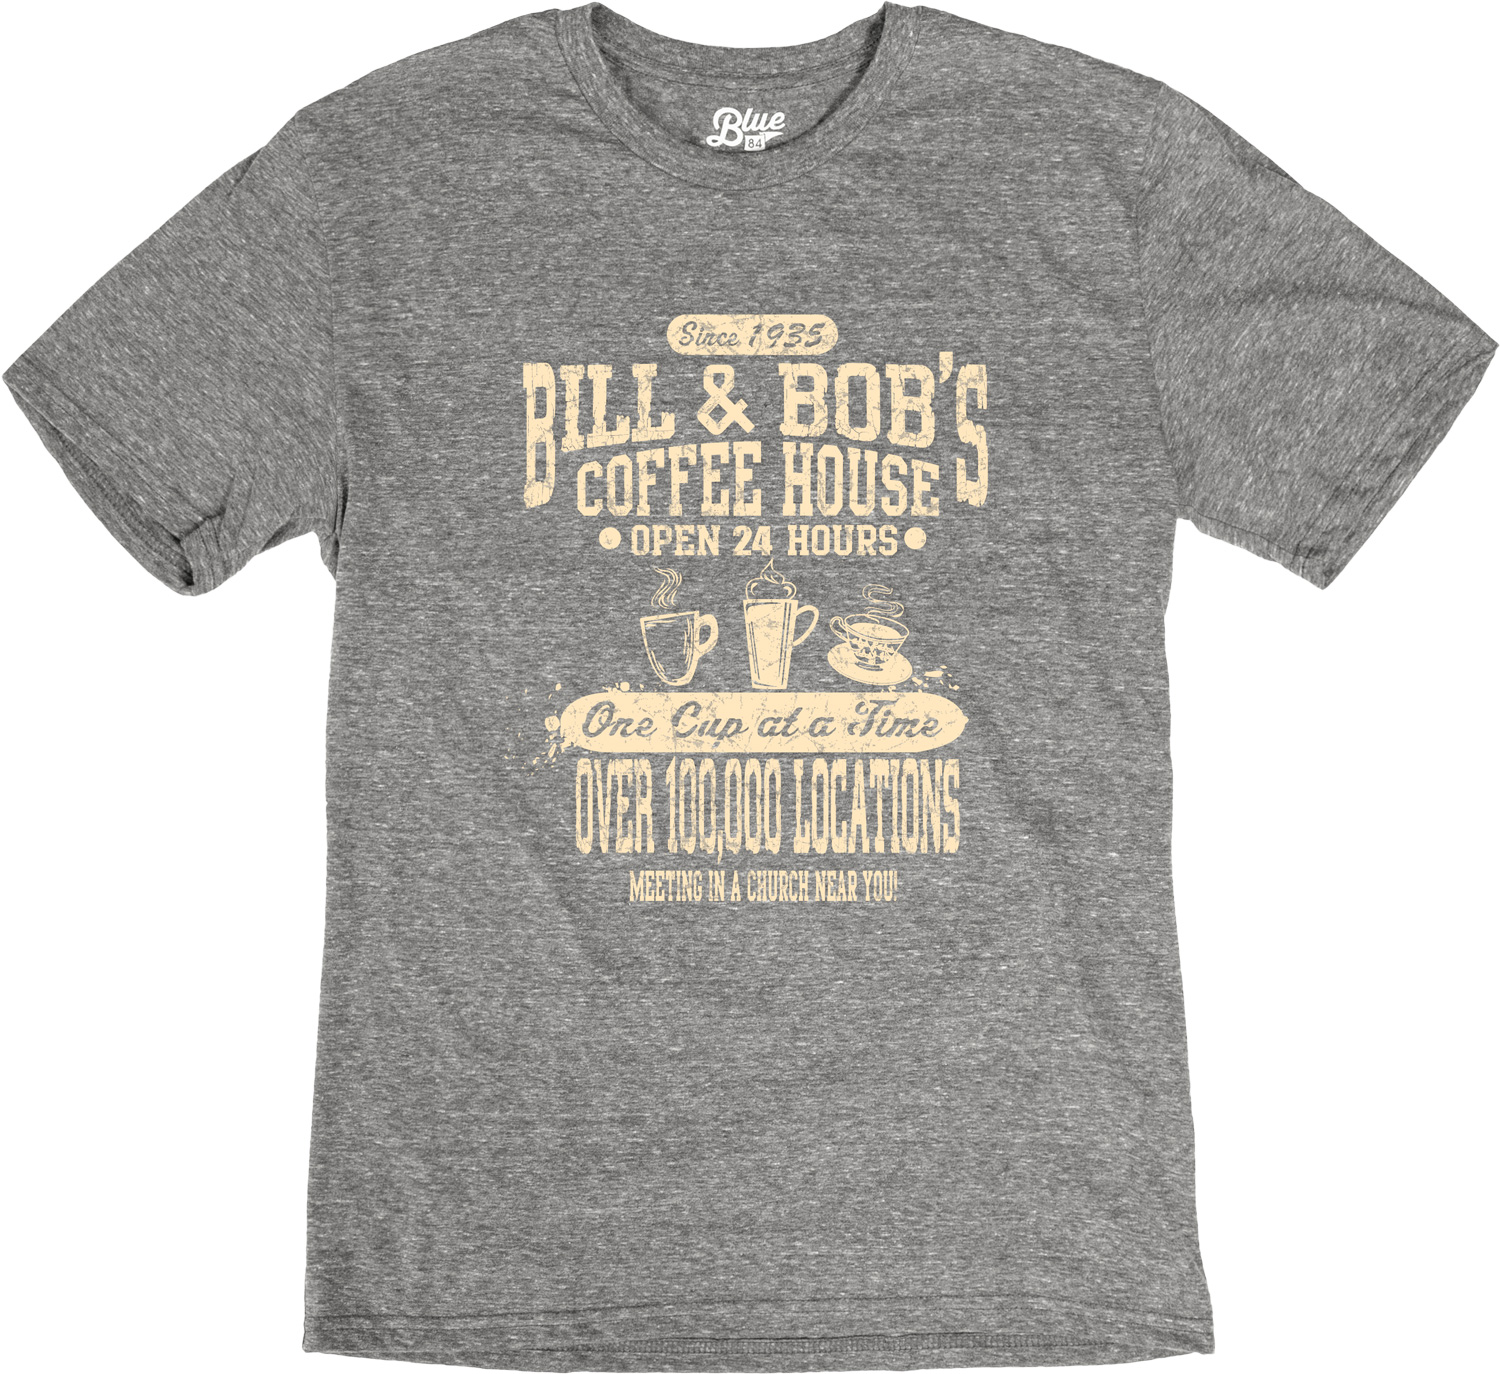 Bill and Bob's Coffee House Tee - Grey - Click Image to Close